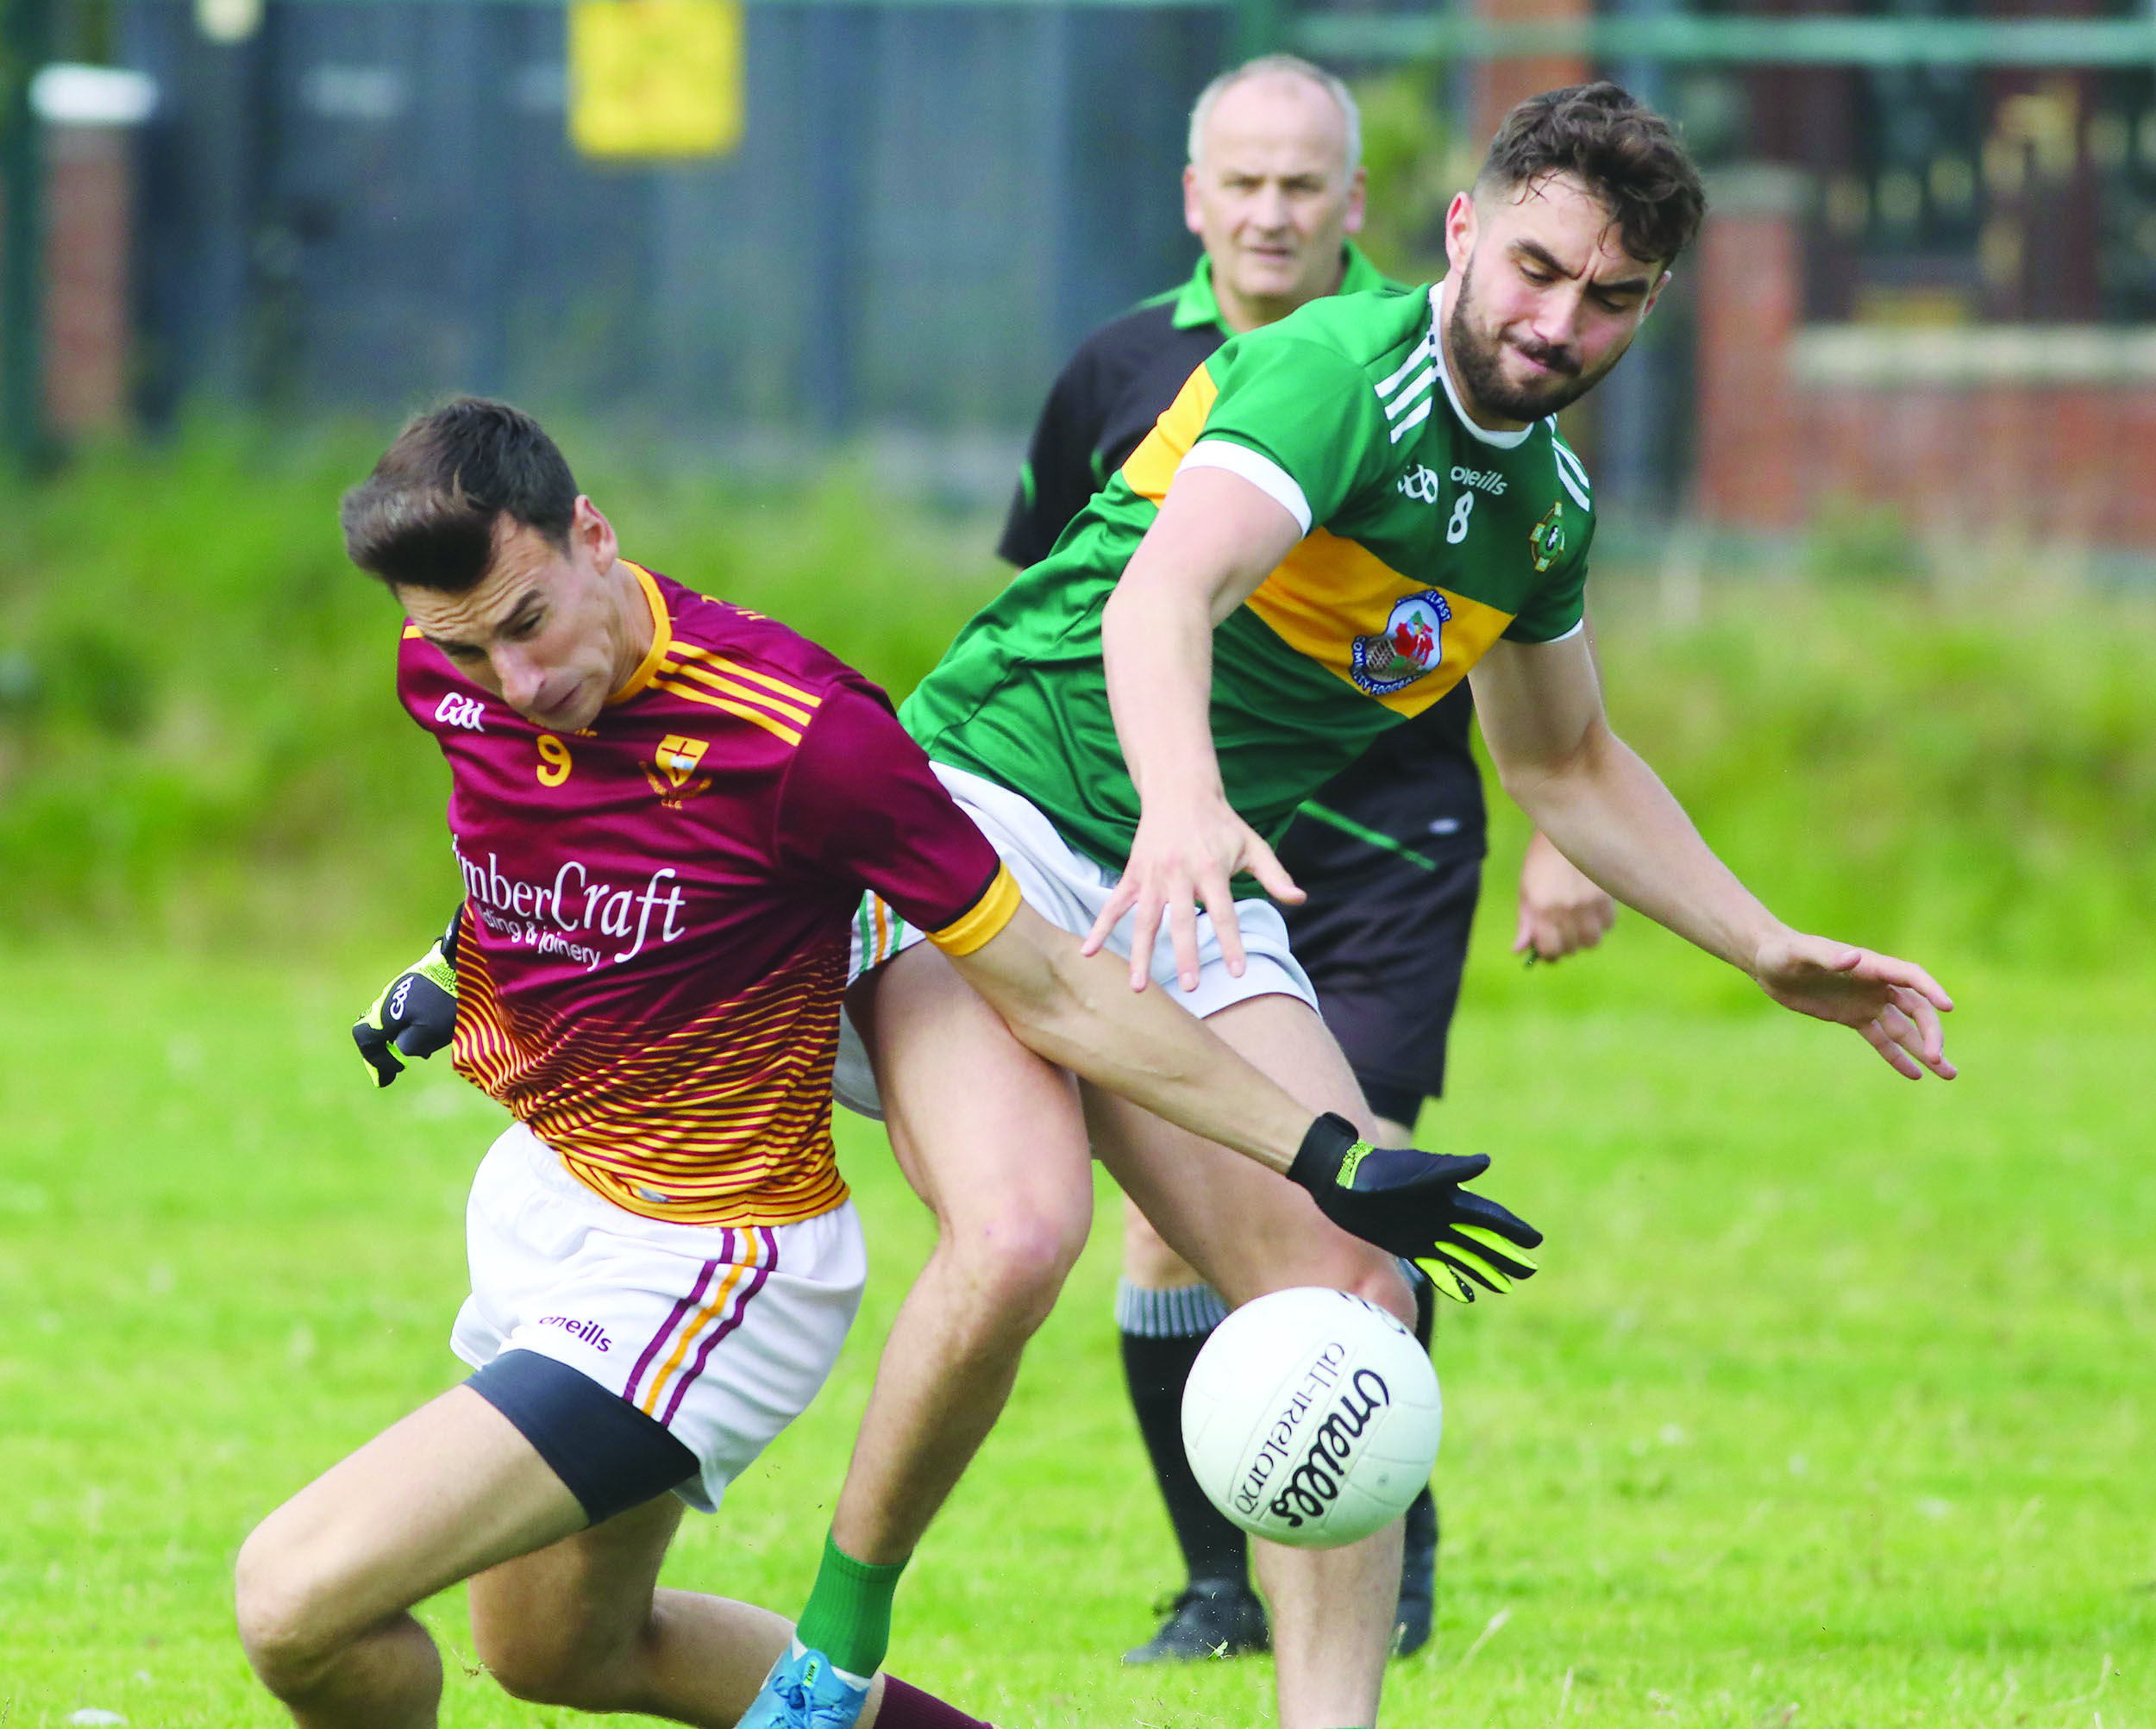 Pearse’s missed out on a bye to the last four due to their defeat against O’Donnell’s, but face a St Agnes’s side with renewed confidence after their win against Ballycastle